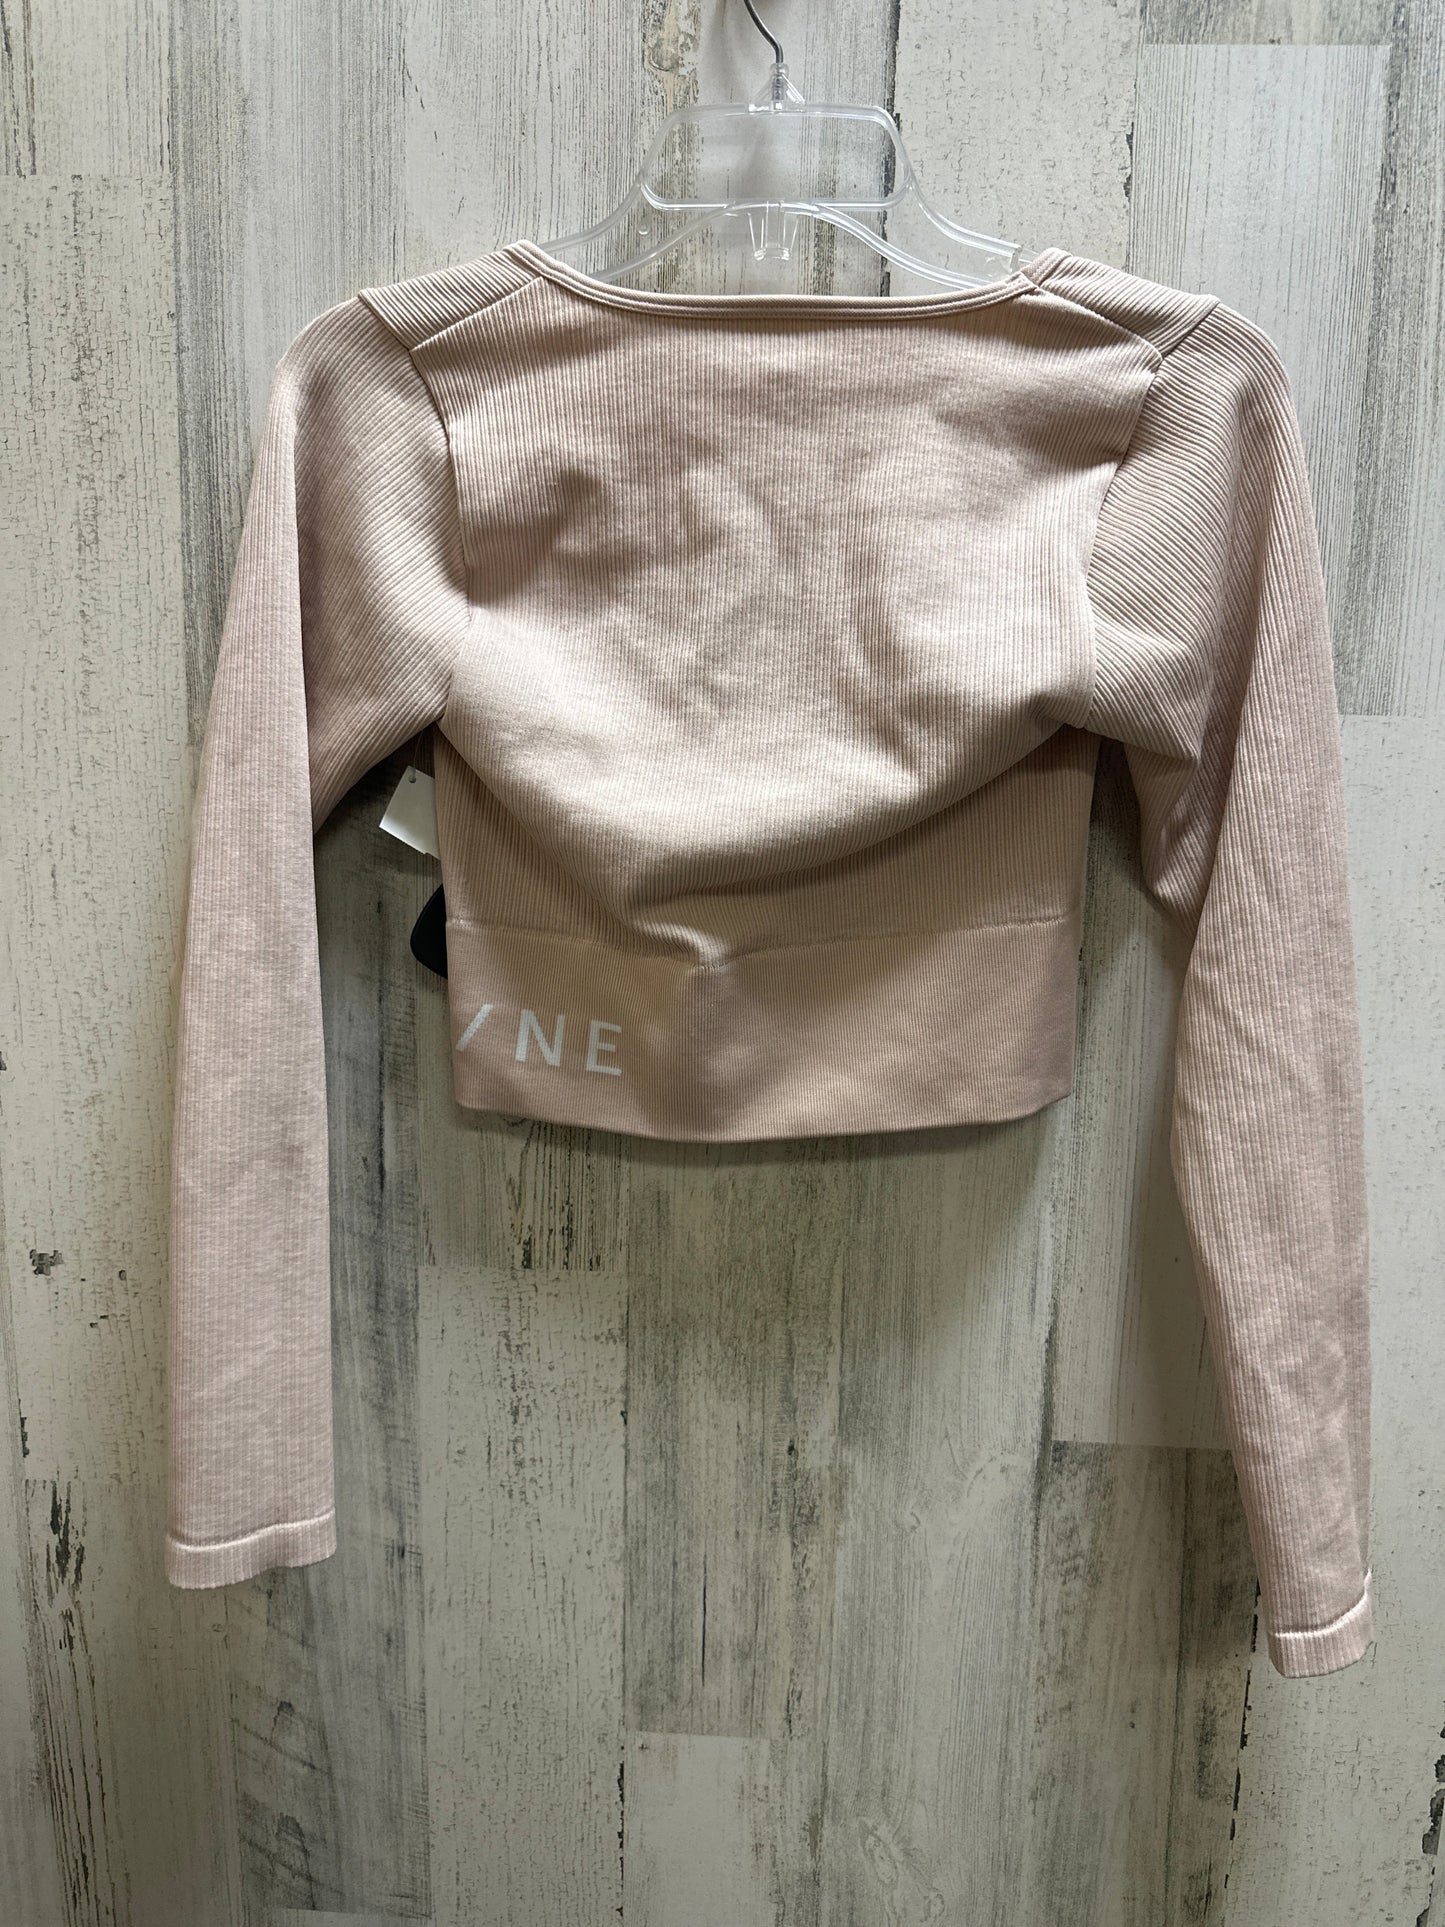 Pink Athletic Top Long Sleeve Crewneck Aerie, Size M